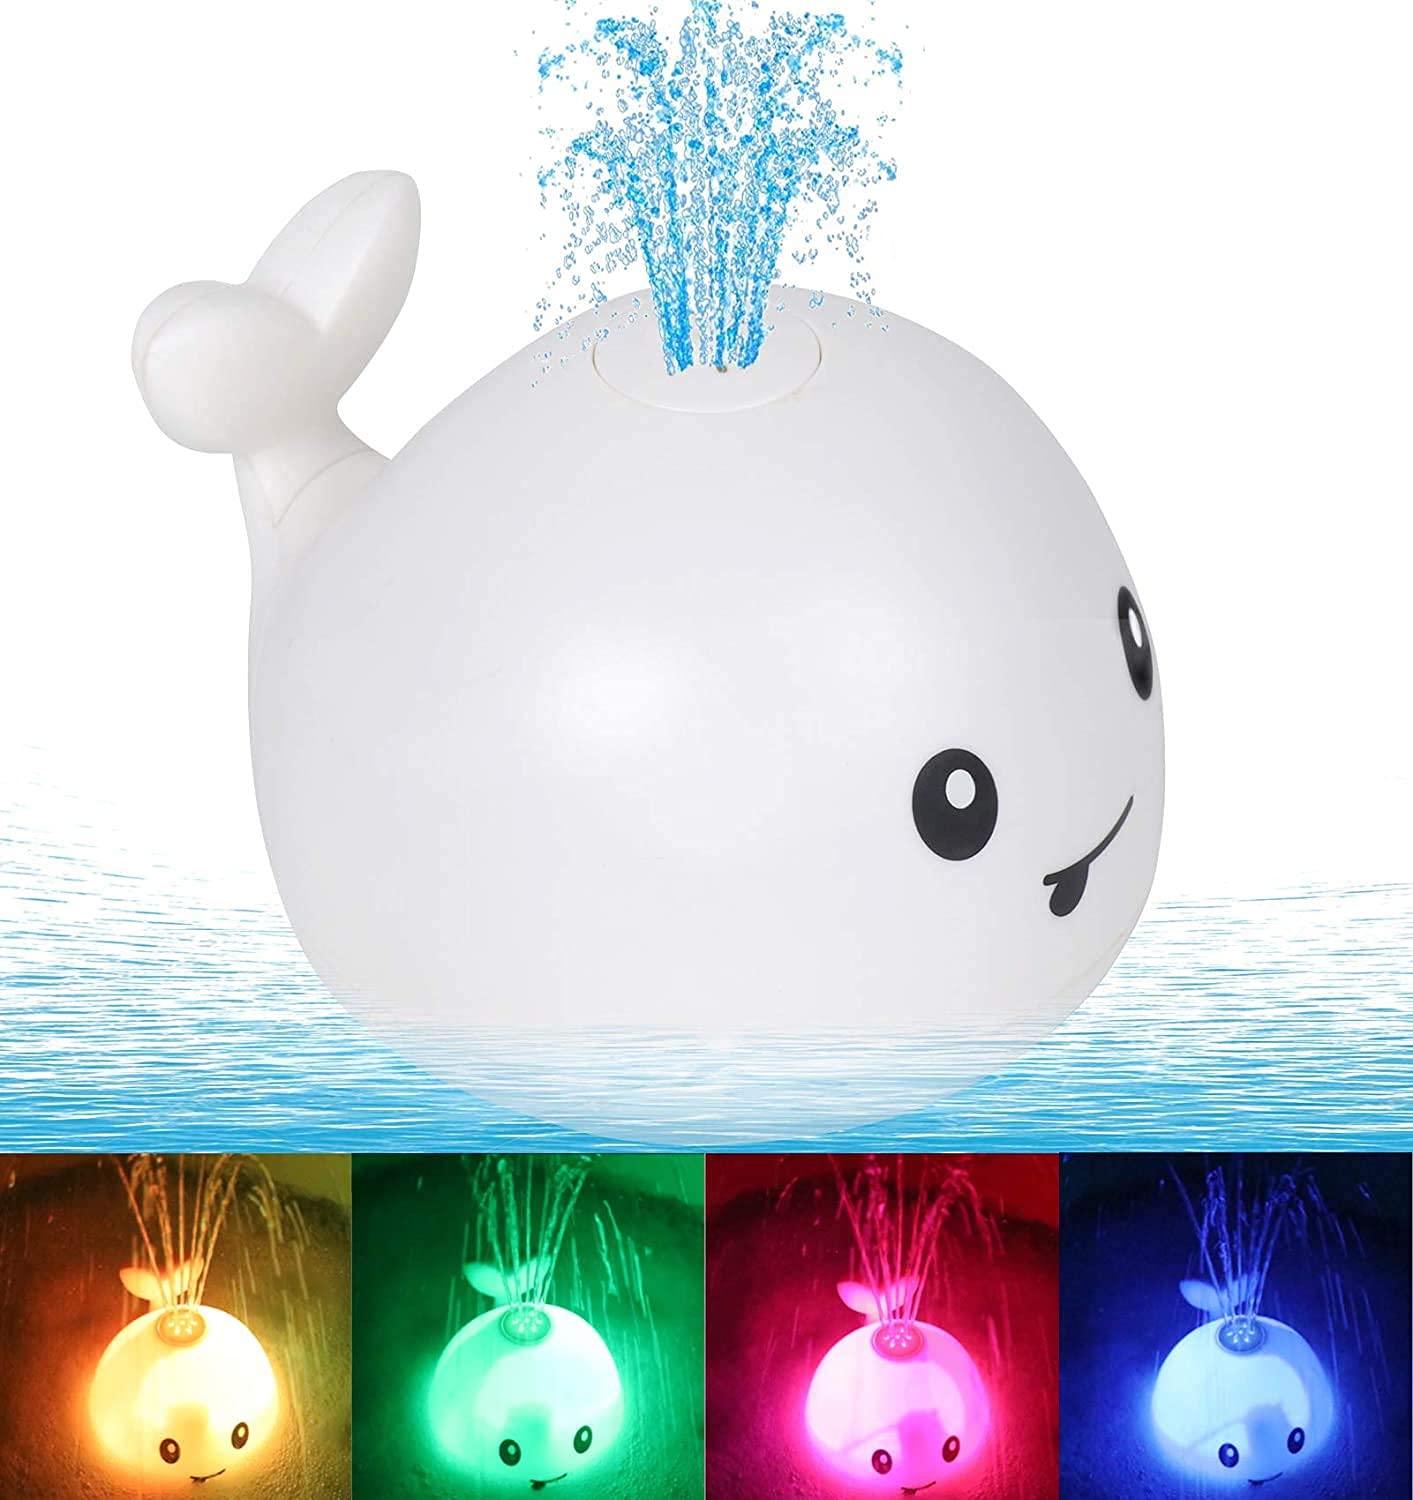 Leipal Baby Bath Toys for Kids Light Up Whale Bath Toys Sprinkler Bathtub Toys for Toddlers (White)